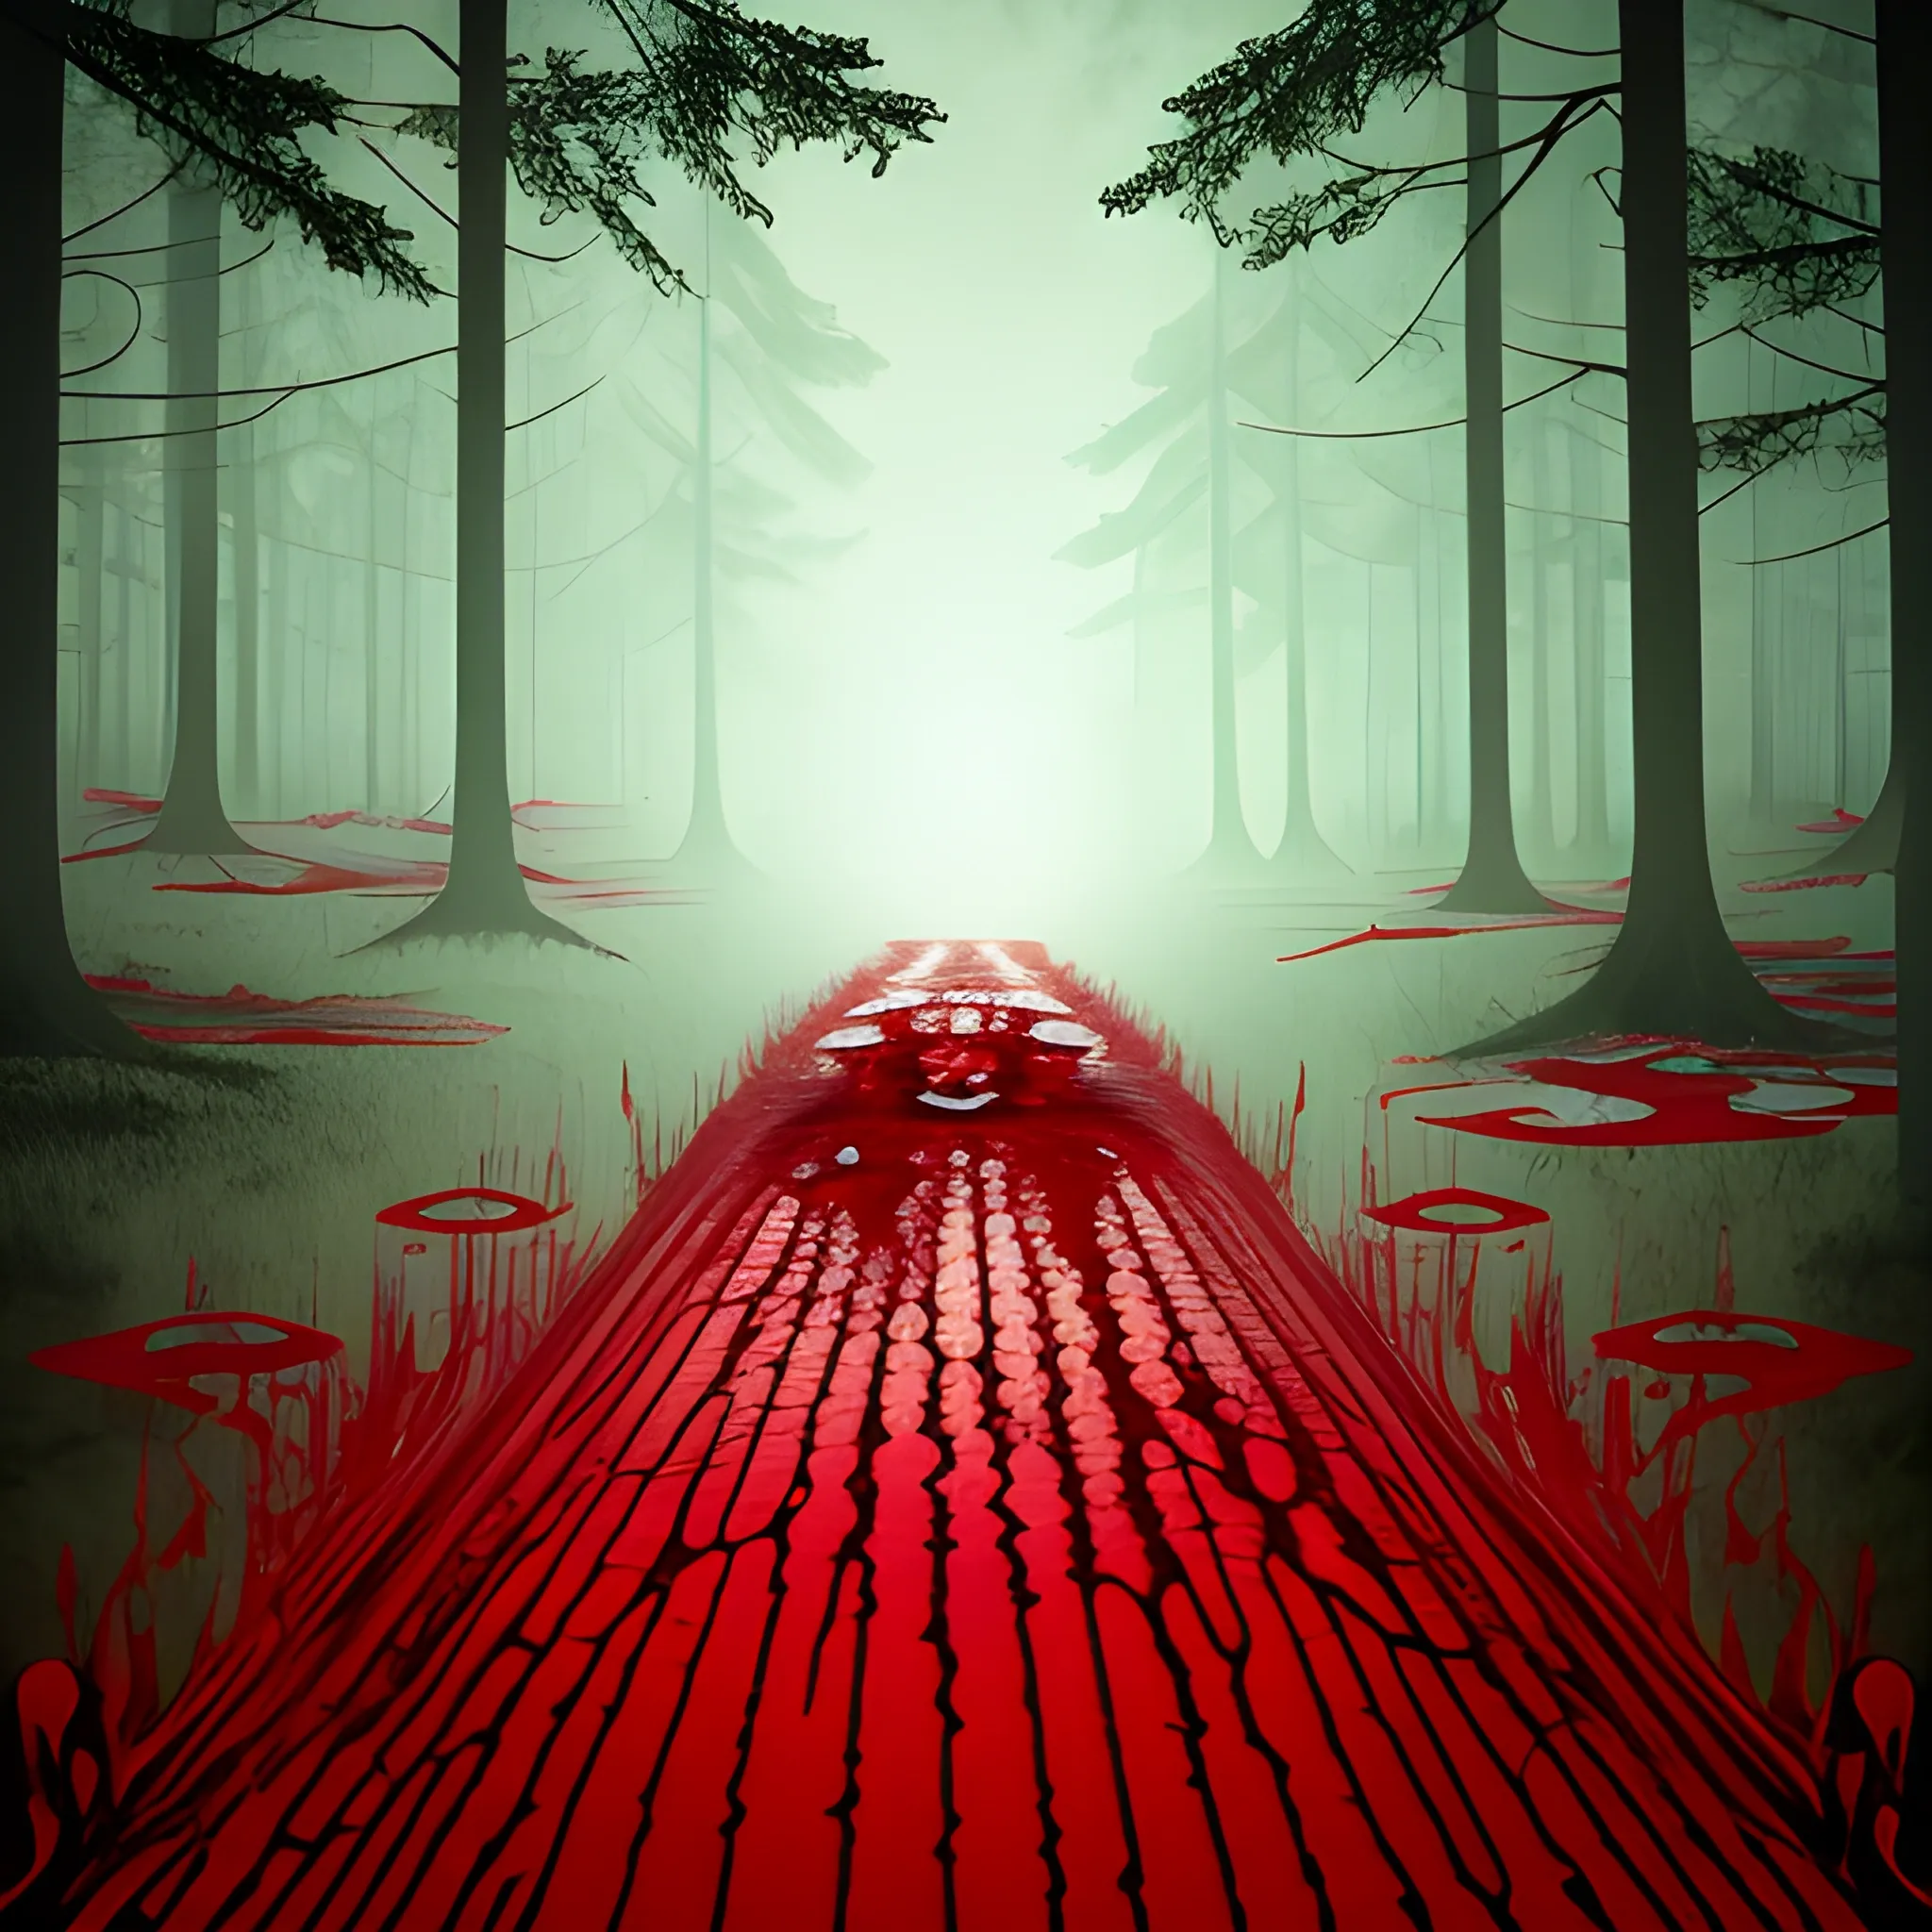 Bloody zombie blood dripping, forest background, hyper deformed